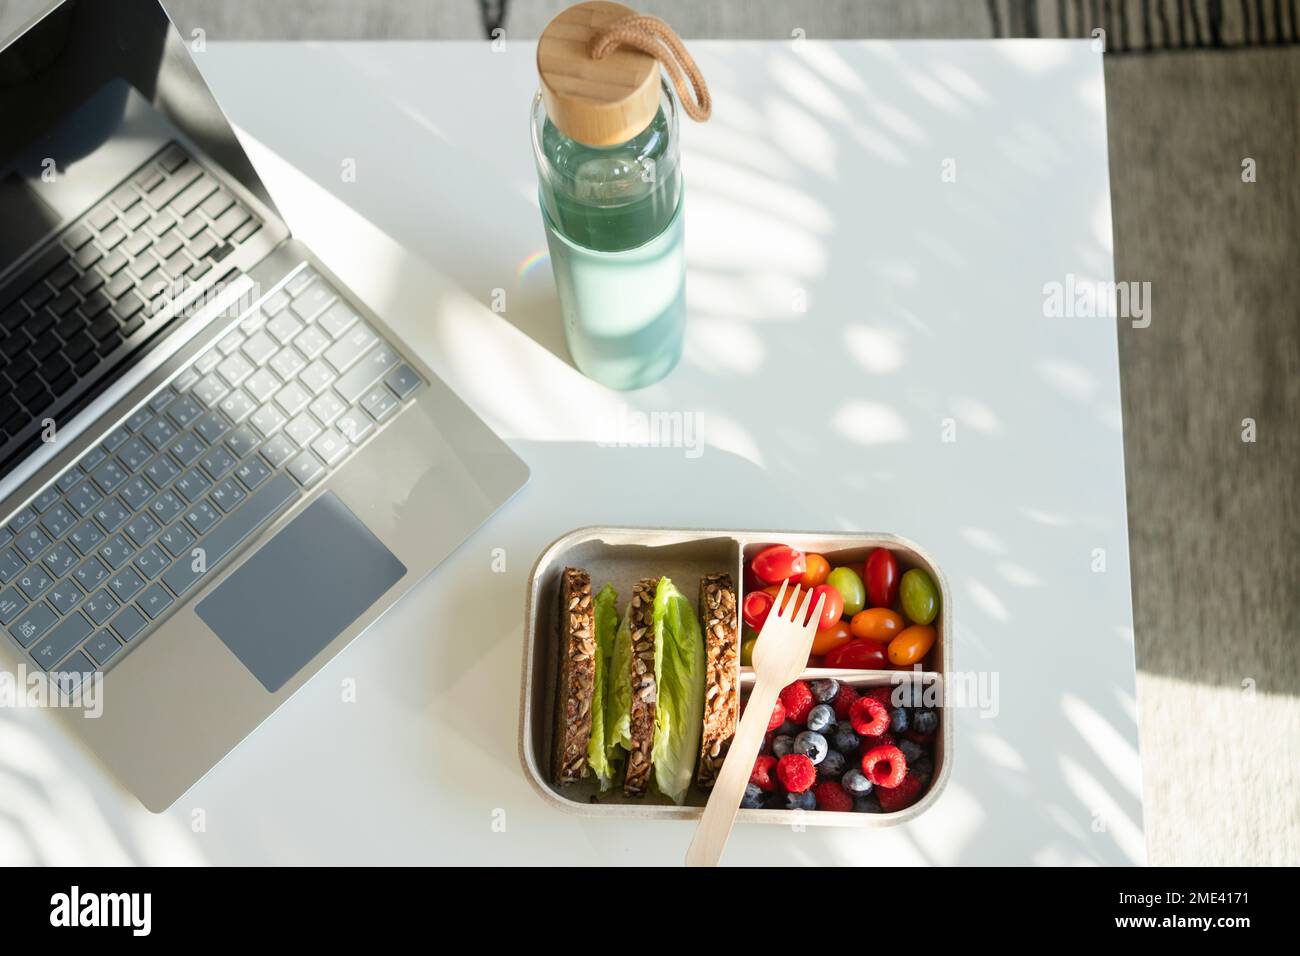 Rye bread, berries and salad with disposable fork in lunch box on table by water bottle and laptop Stock Photo